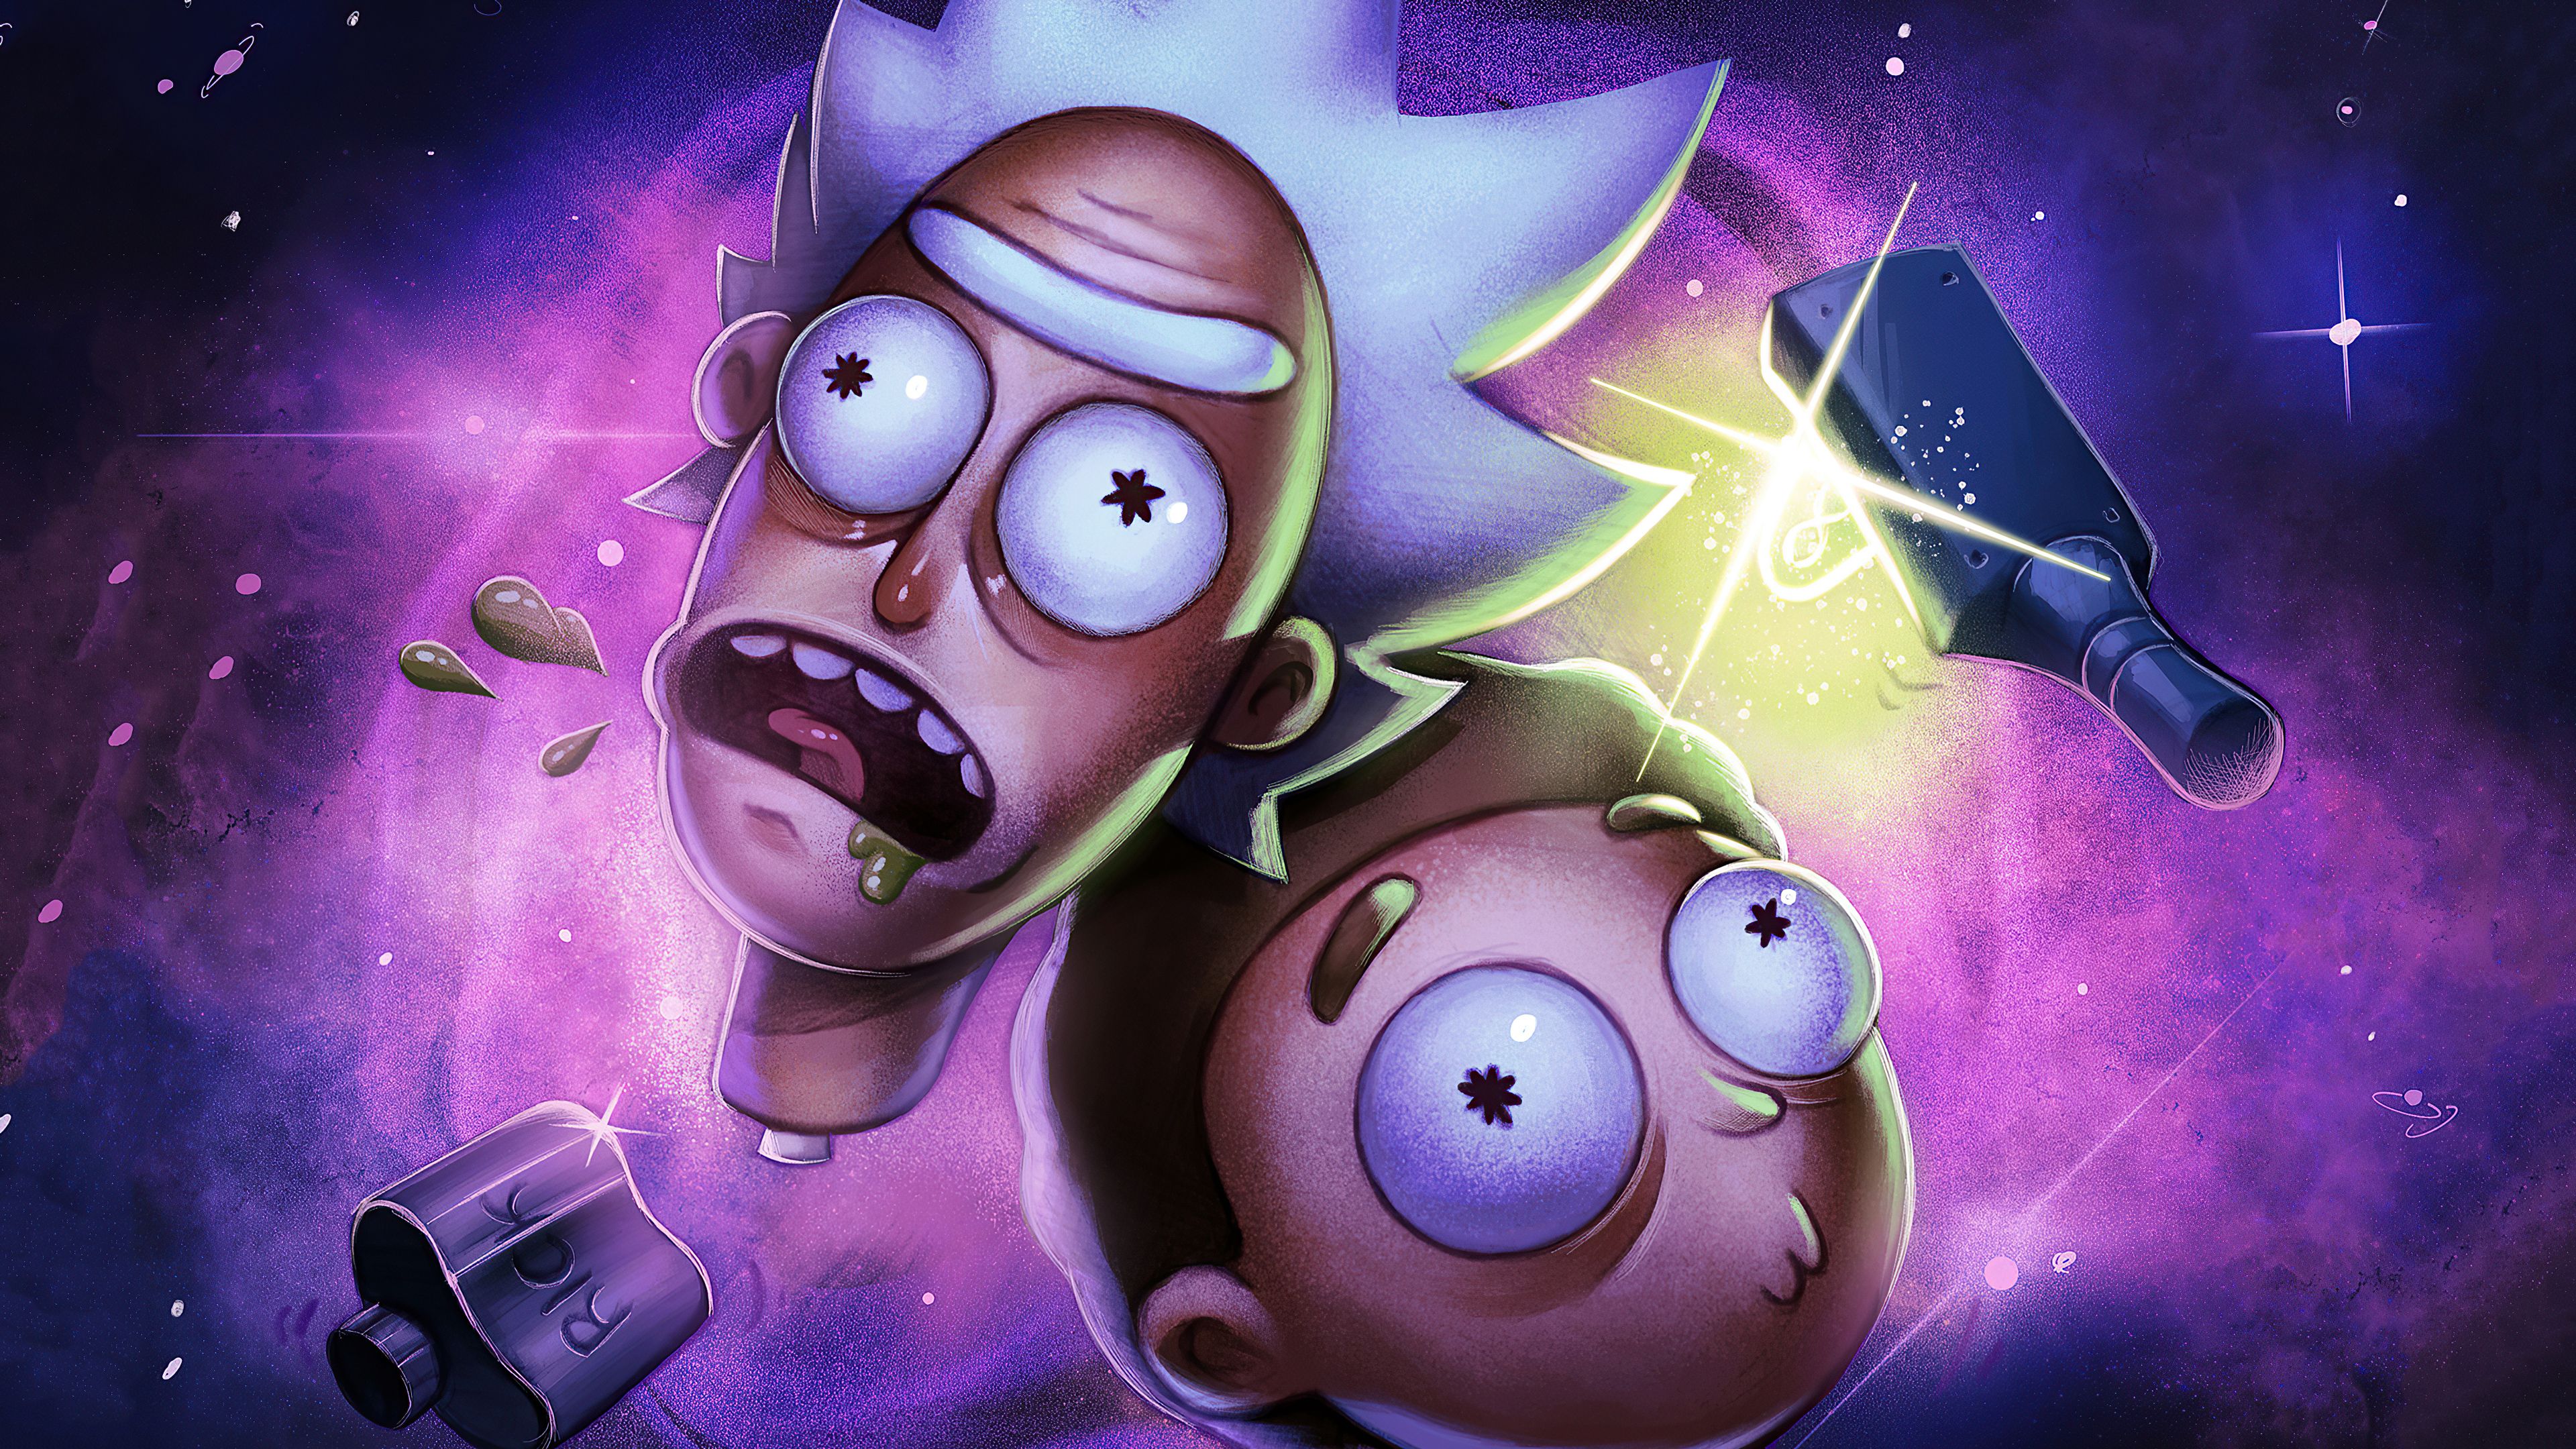 TV Show Morty Smith Rick Sanchez Rick and Morty In Purple Backgrounds Wit.....